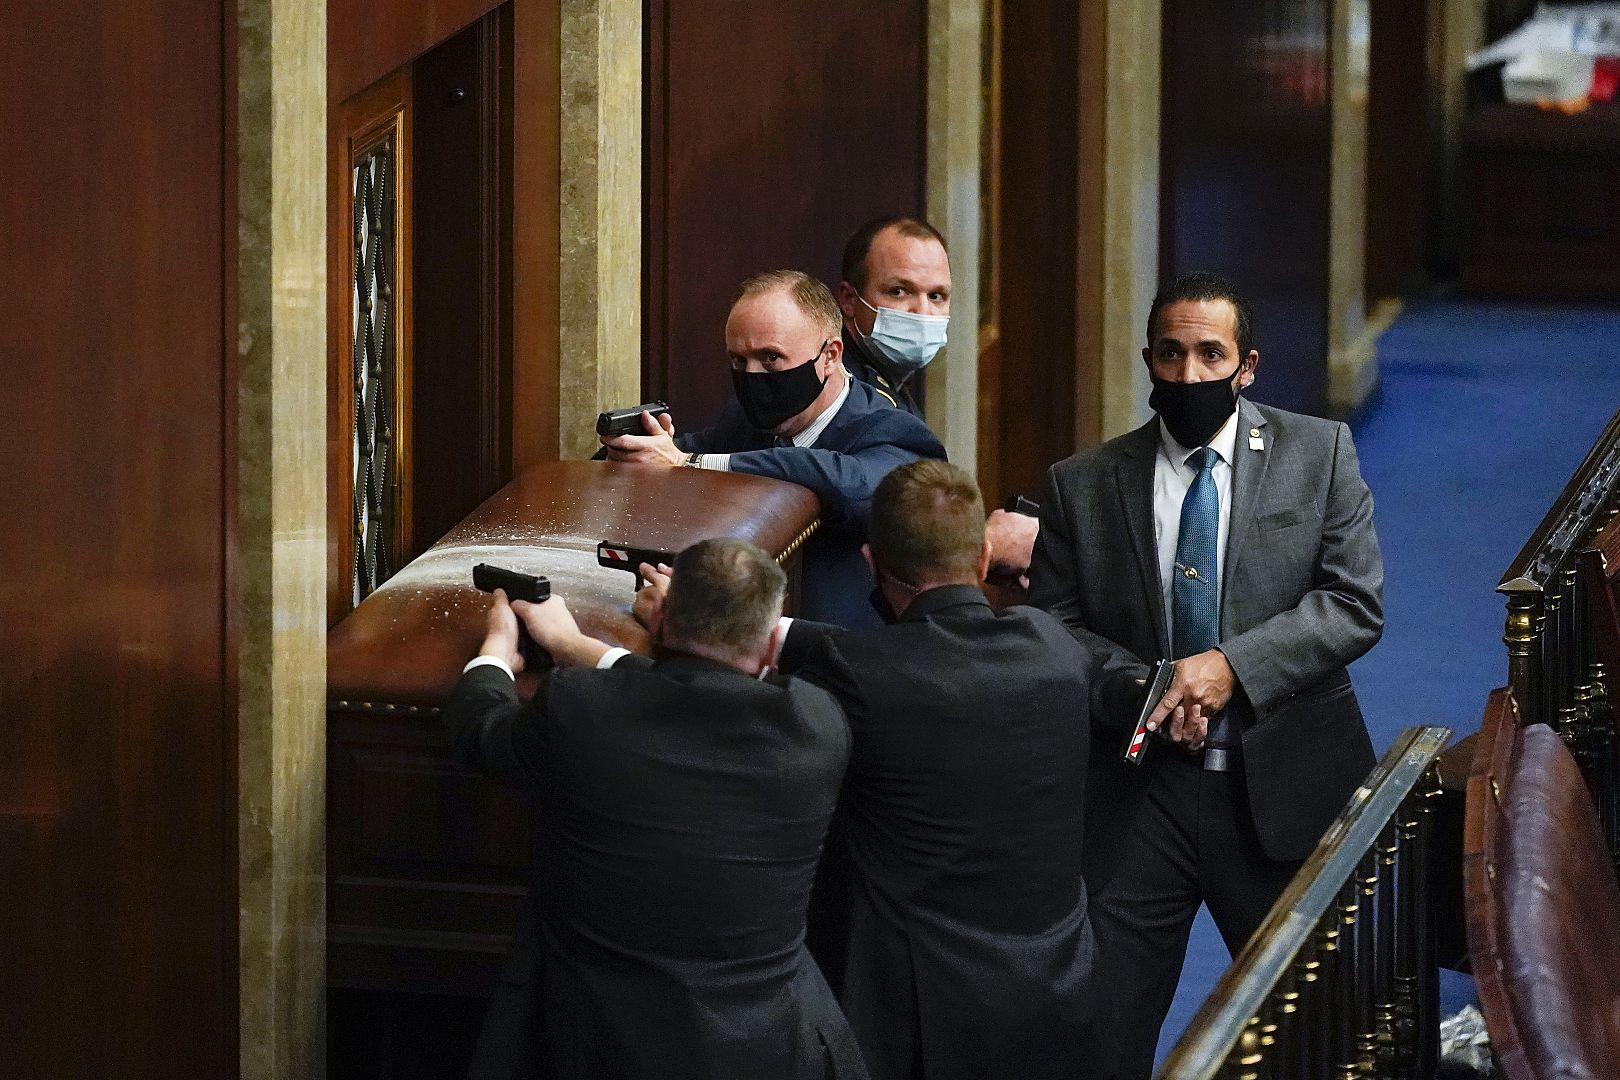 U.S. Capitol Police with guns drawn stand near a barricaded door as protesters try to break into the House Chamber at the U.S. Capitol, Washington, USA. January 6, 2021